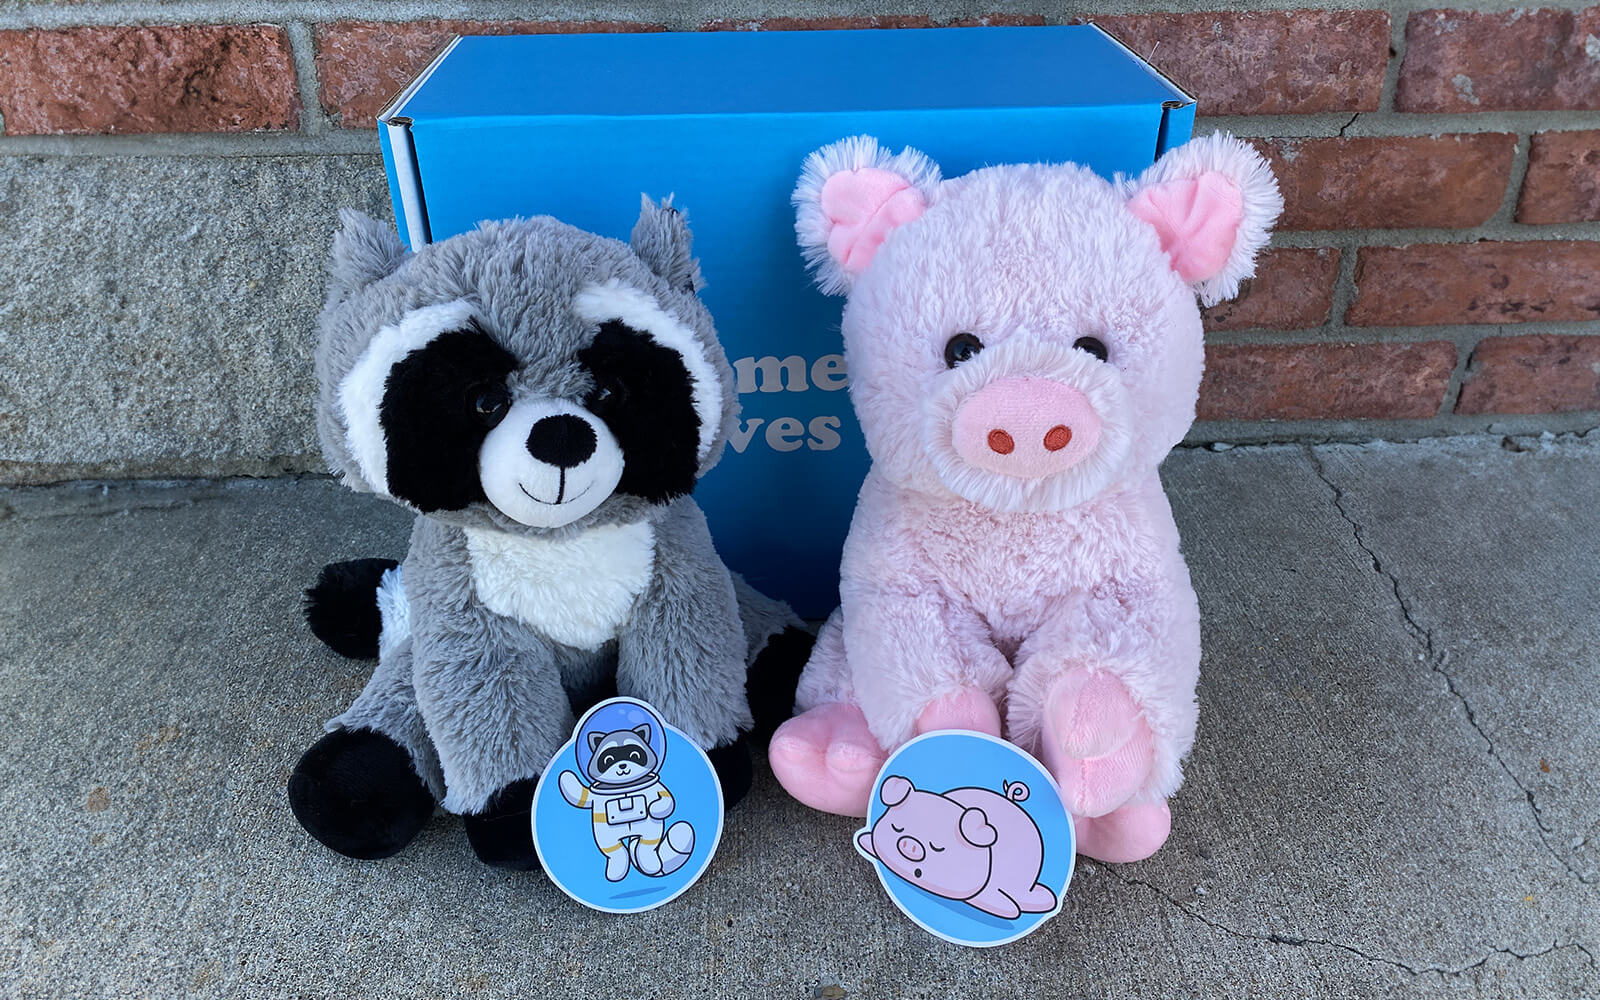 An image of Rosie the Raccoon and Penny the Pig with their stickers, sitting in front of the signature blue "Someone Loves You" box 